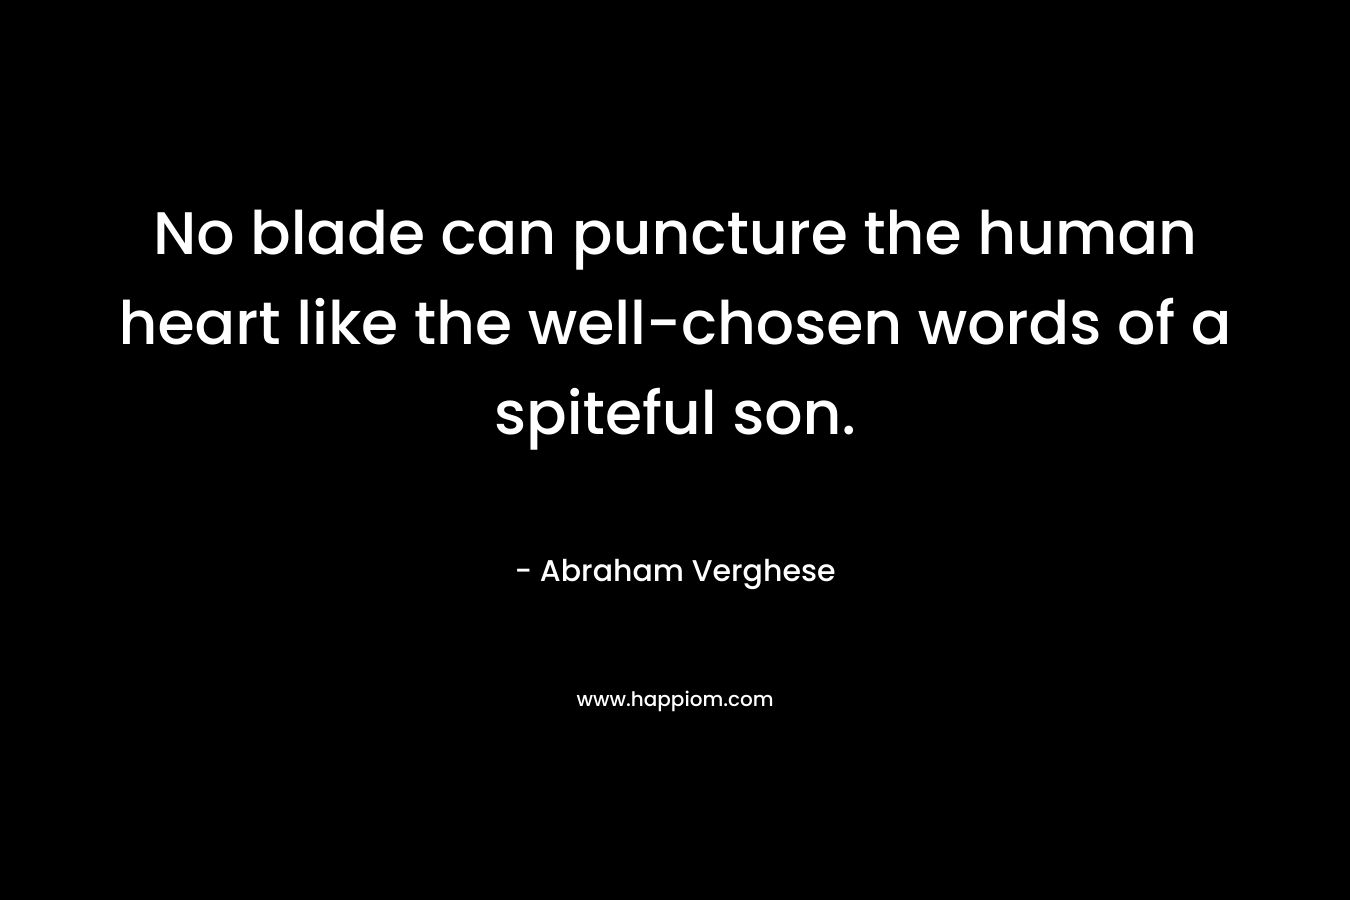 No blade can puncture the human heart like the well-chosen words of a spiteful son. – Abraham Verghese